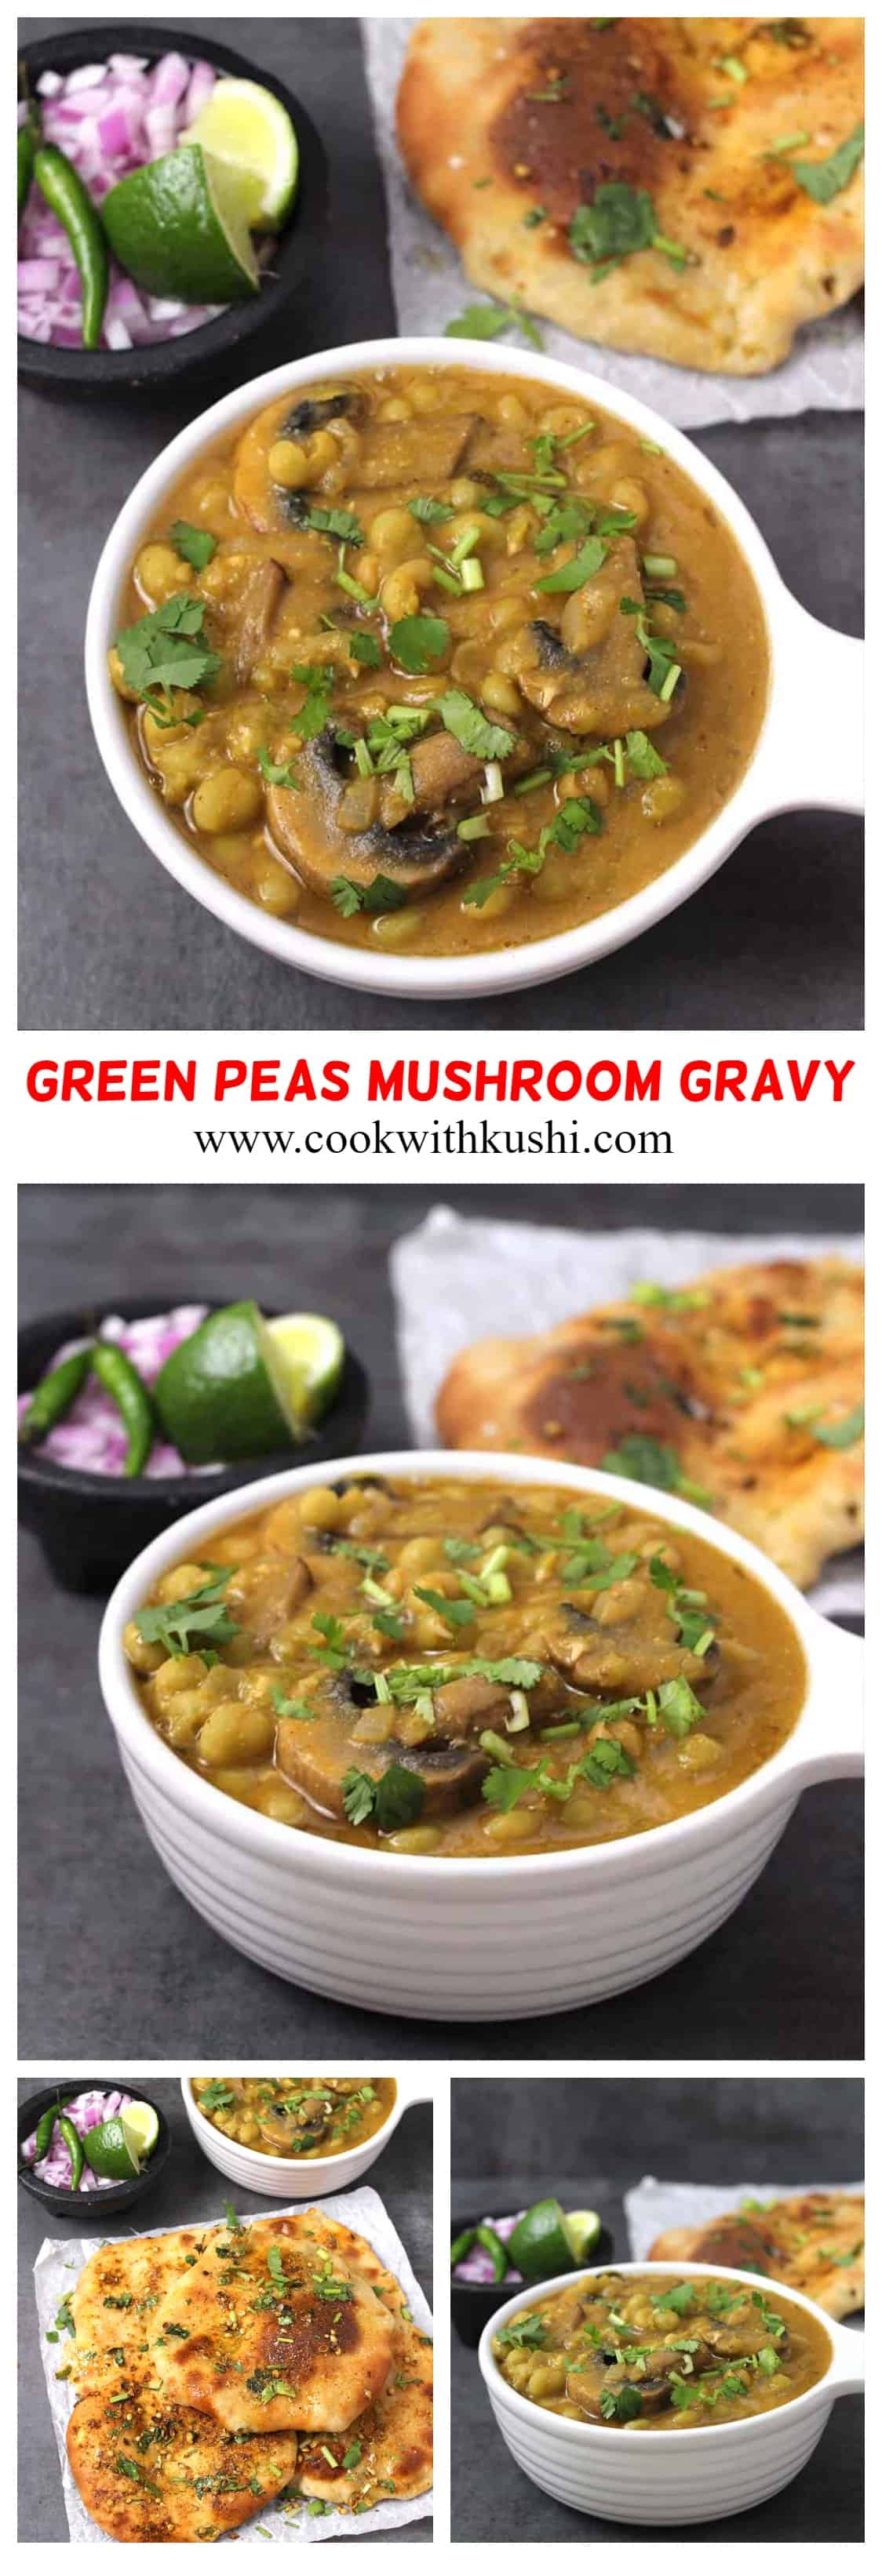 Matar Mushroom Masala is a popular Indian curry from Punjab where mushroom and green peas are cooked in tomato based sauce or gravy spiced with garam masala (curry powder). #mushroomgravy #Mushroomsauce #Mushroomrecipes #greenpeas #indianrecipes